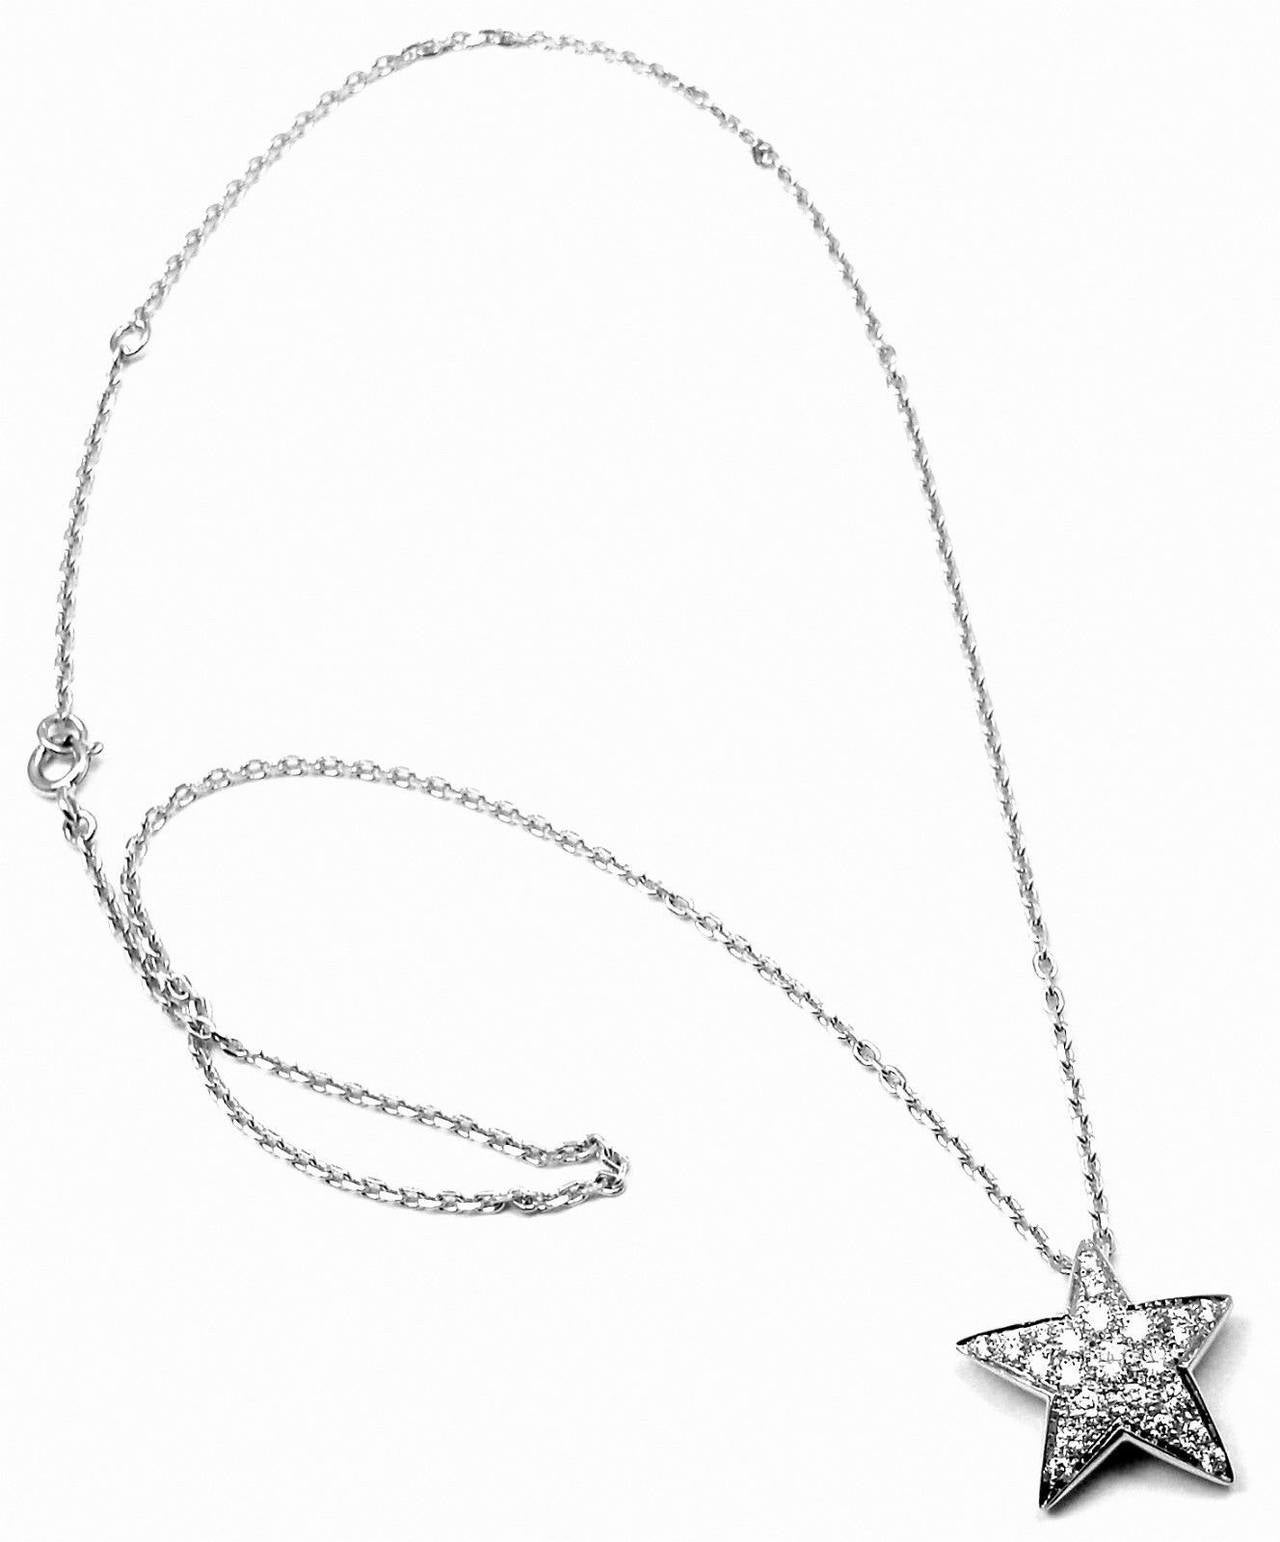 18k White Gold Diamond Comete Star Pendant Necklace by Chanel.
With 22 Diamonds, VVS1 Clarity, F Color. Total Diamond Weight: .80CT. 

Details:
Length: 16